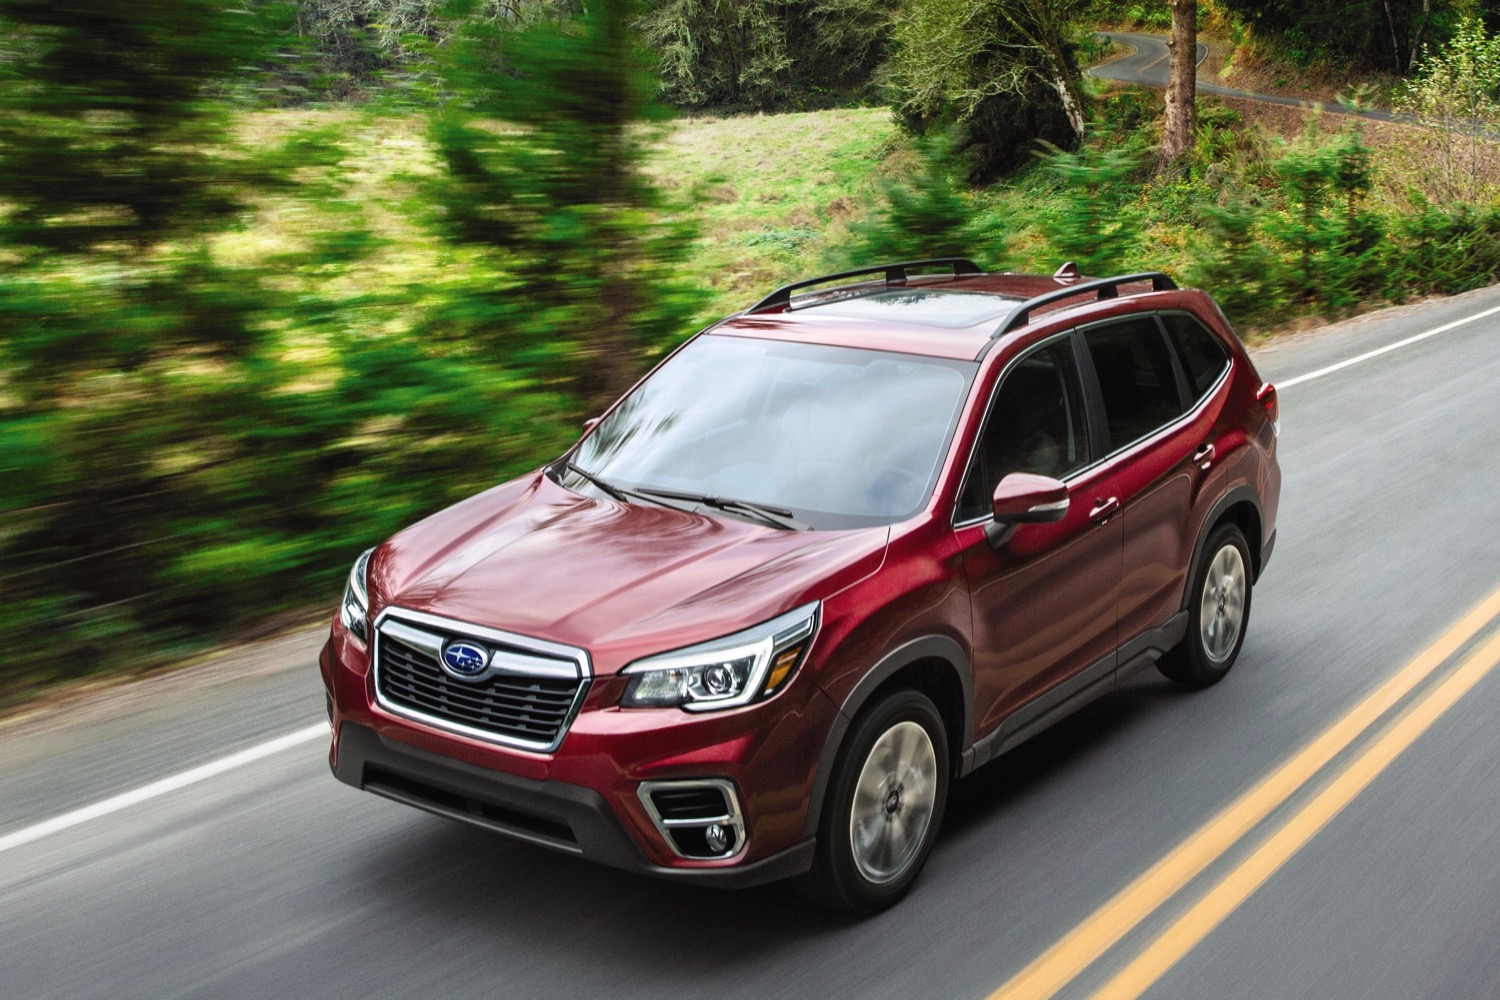 2020 Subaru Forester Priced From $25,505, Gets More Safety Tech